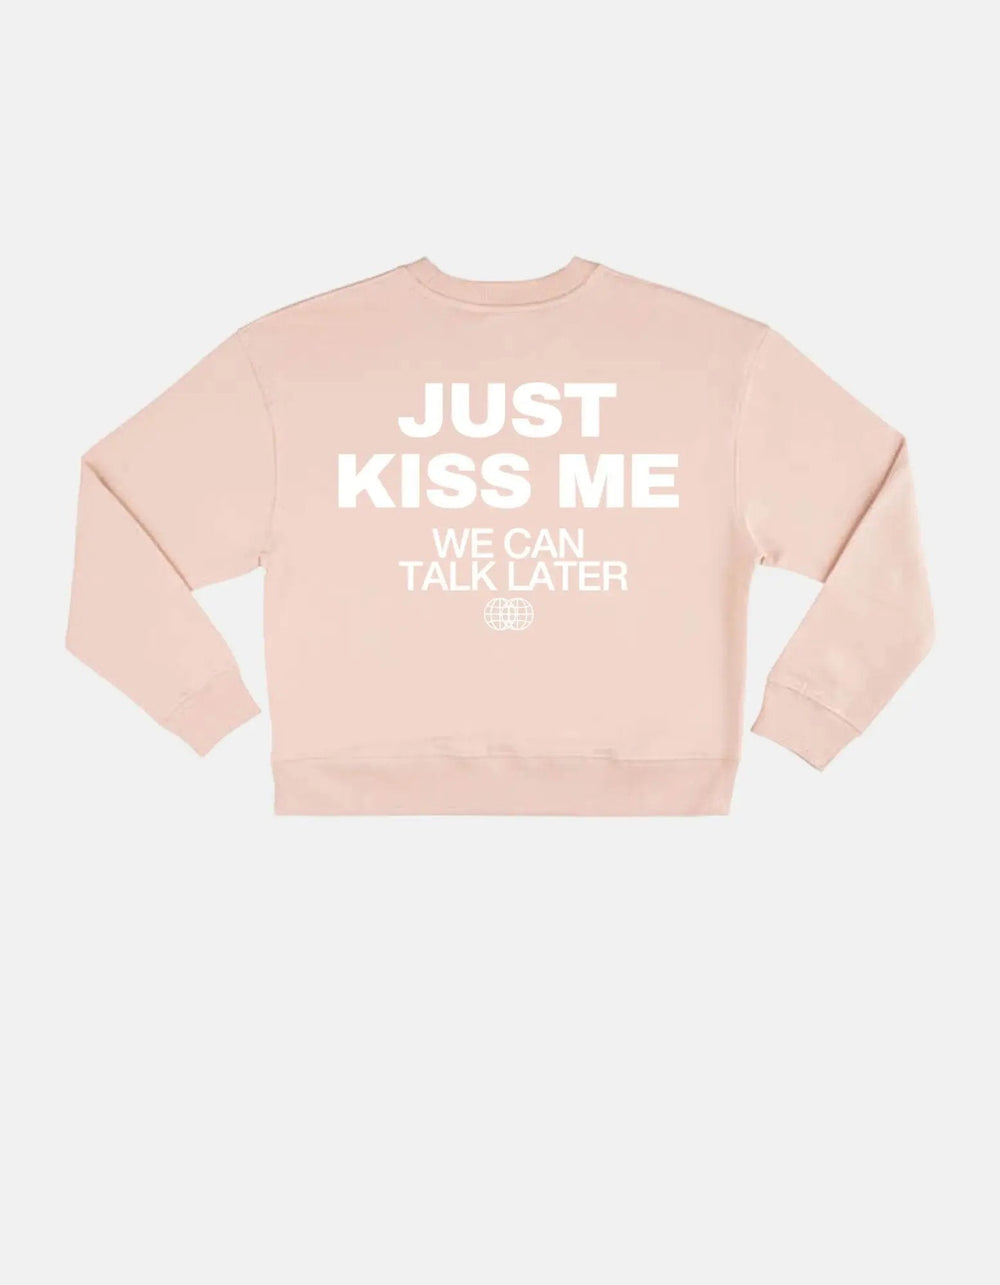 Limited Sweater - Just Kiss me, we can talk later - Onceres™